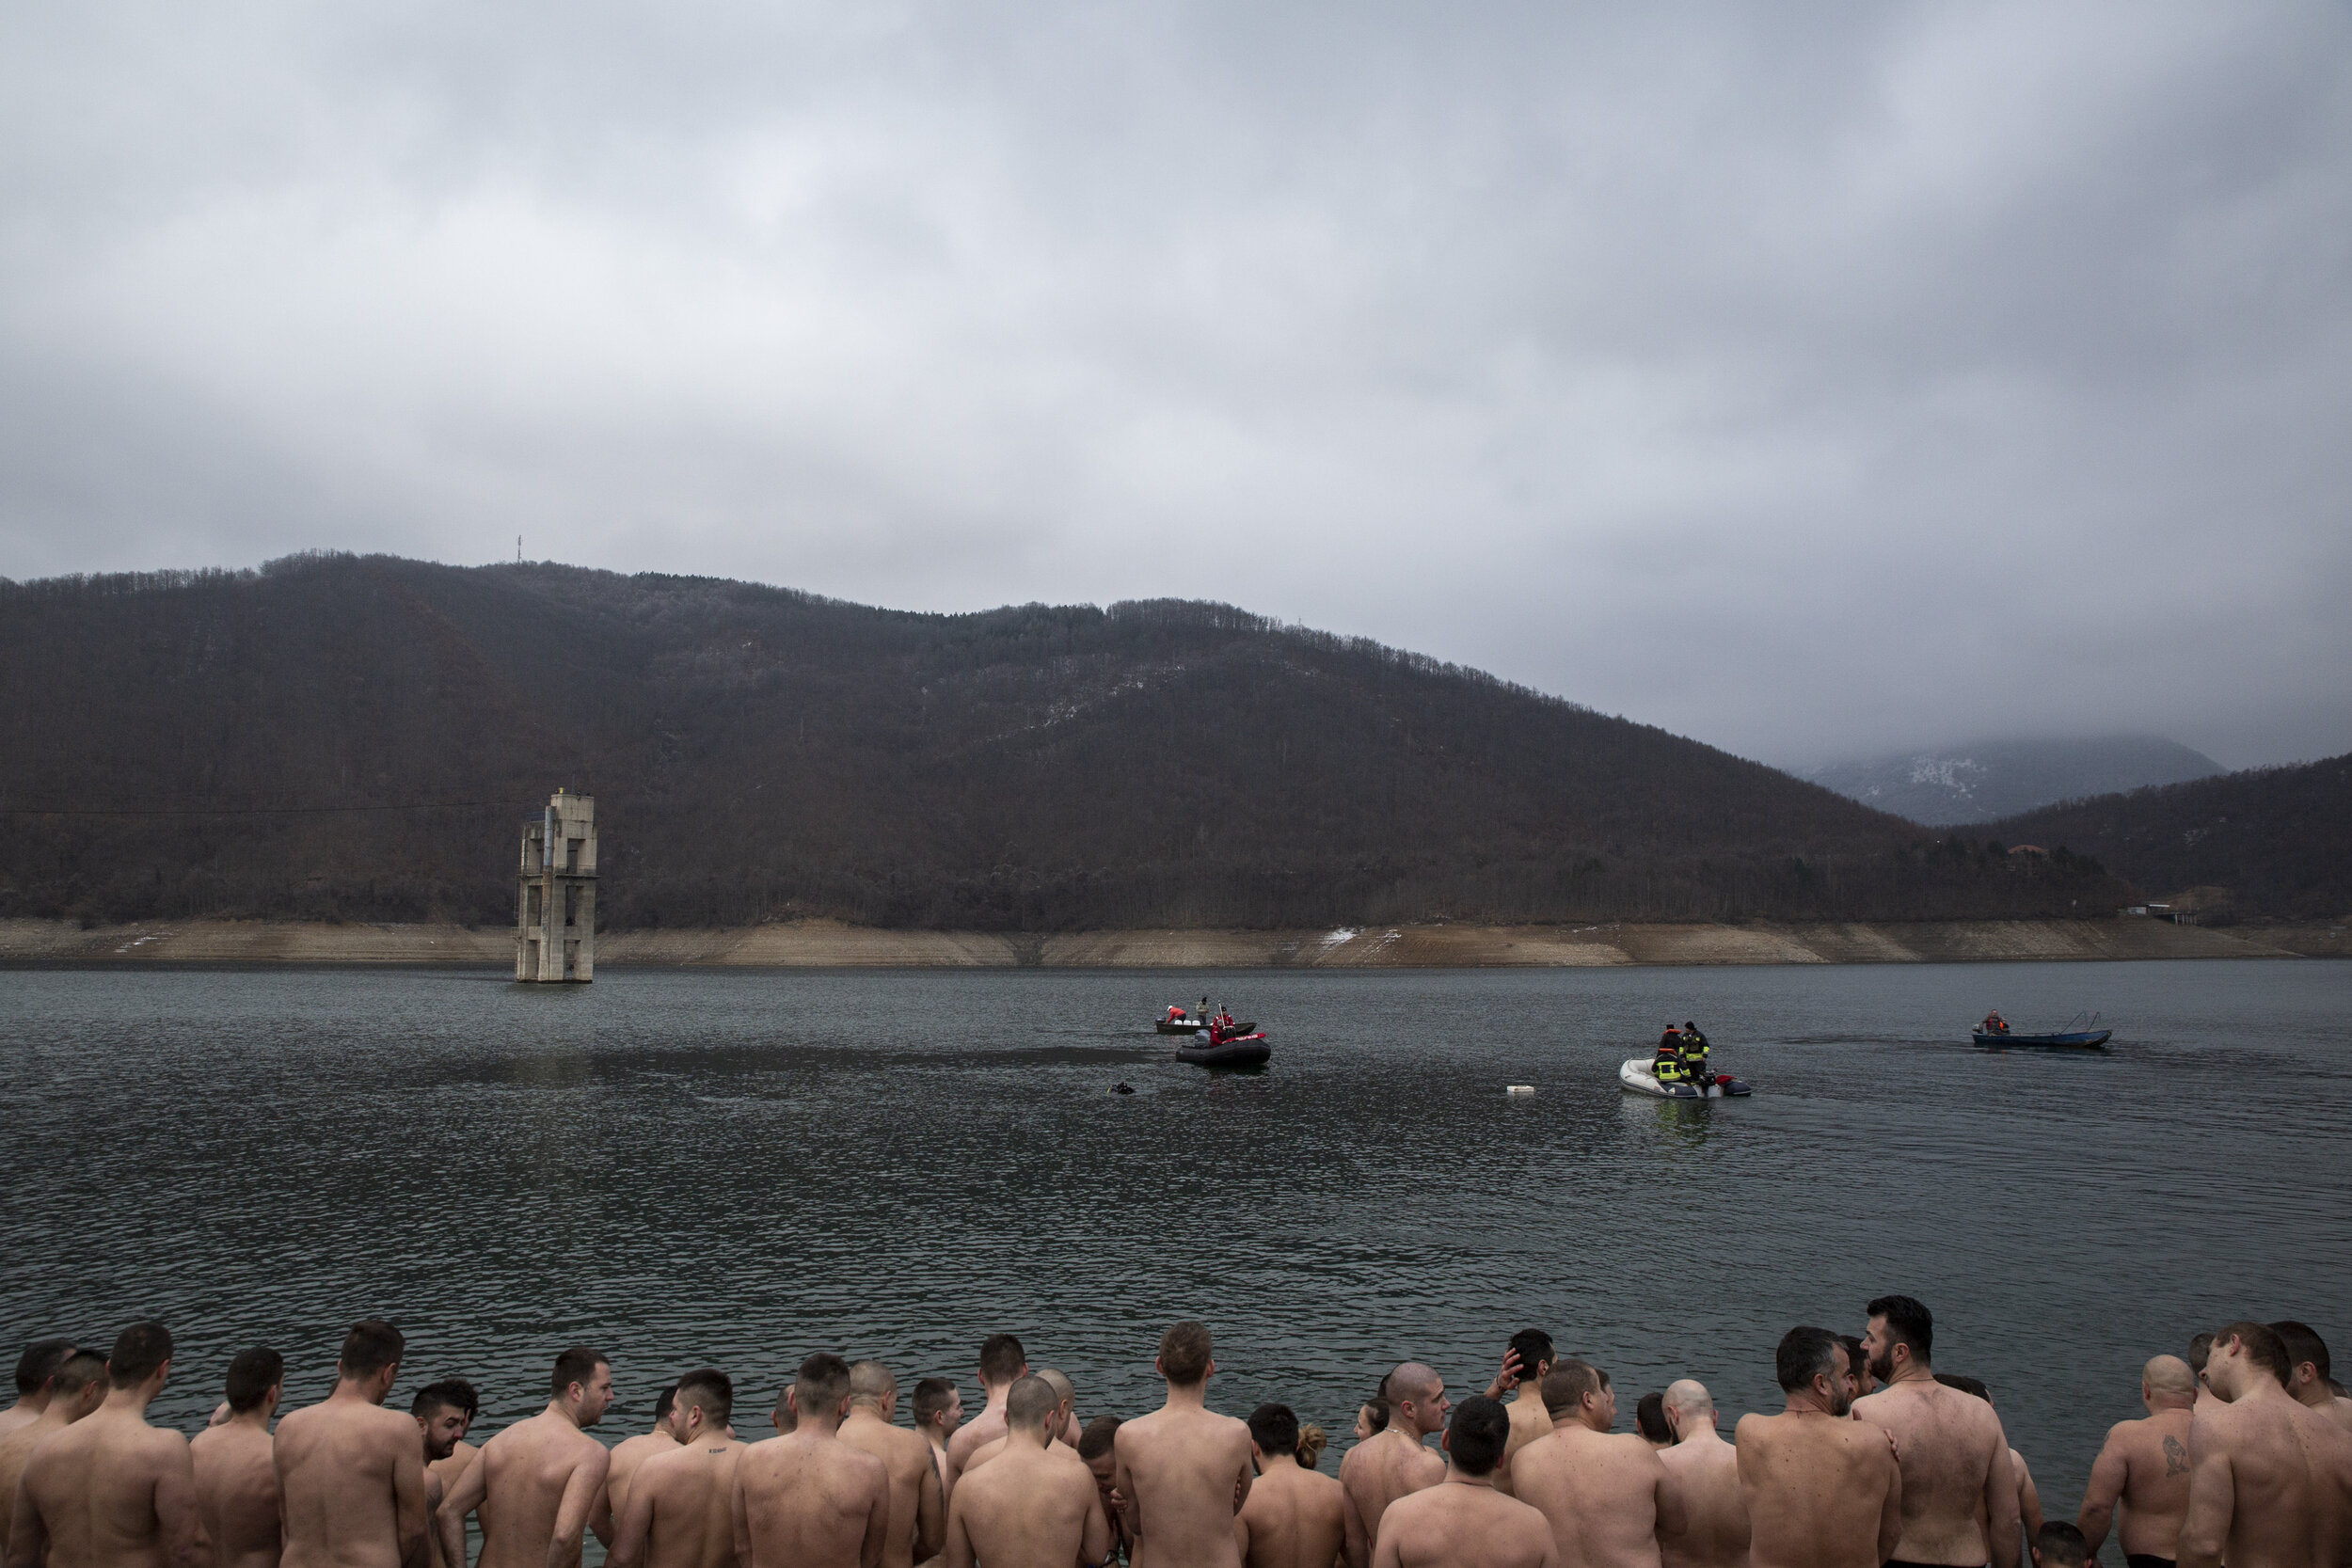  Men from Serb-majority municipalities of North Kosovo gather along the shore of Gazivoda Lake in Zubin Potok to participate in Epiphany cross diving on Jan. 19, 2020. Each year on the day of Christ’s baptism, Orthodox priests throw a gold cross into